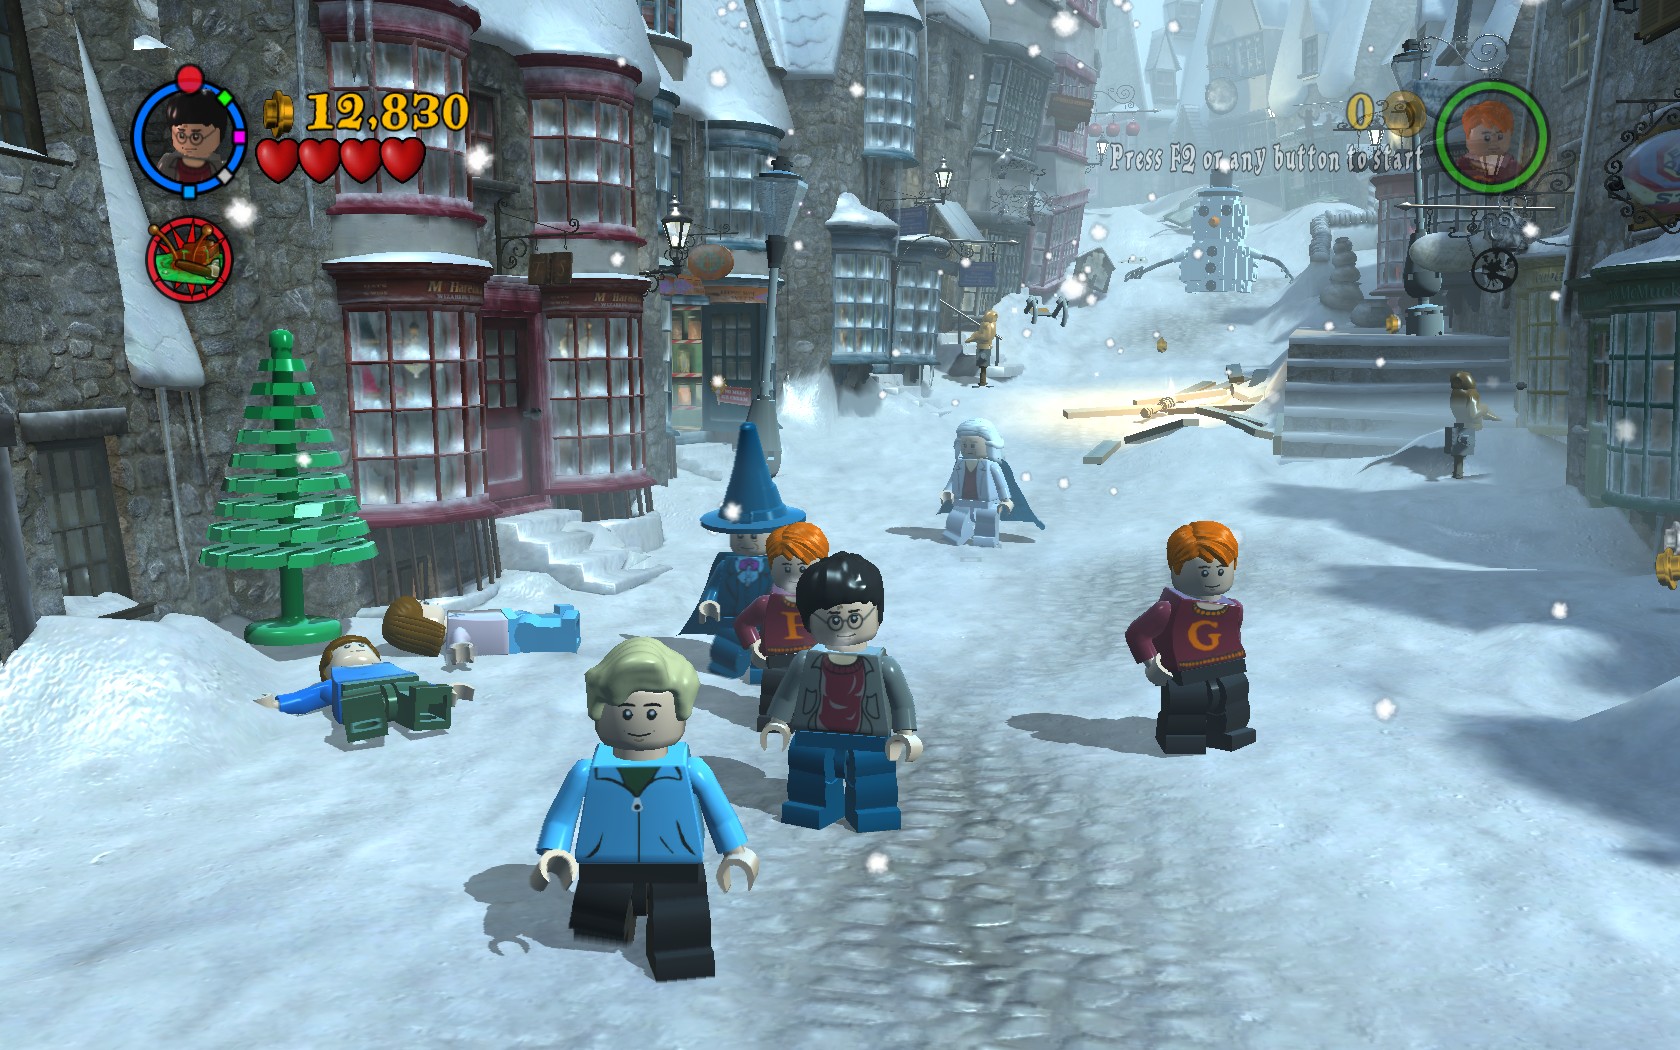 Lego Harry Potter: Years 1-4 PC Game 